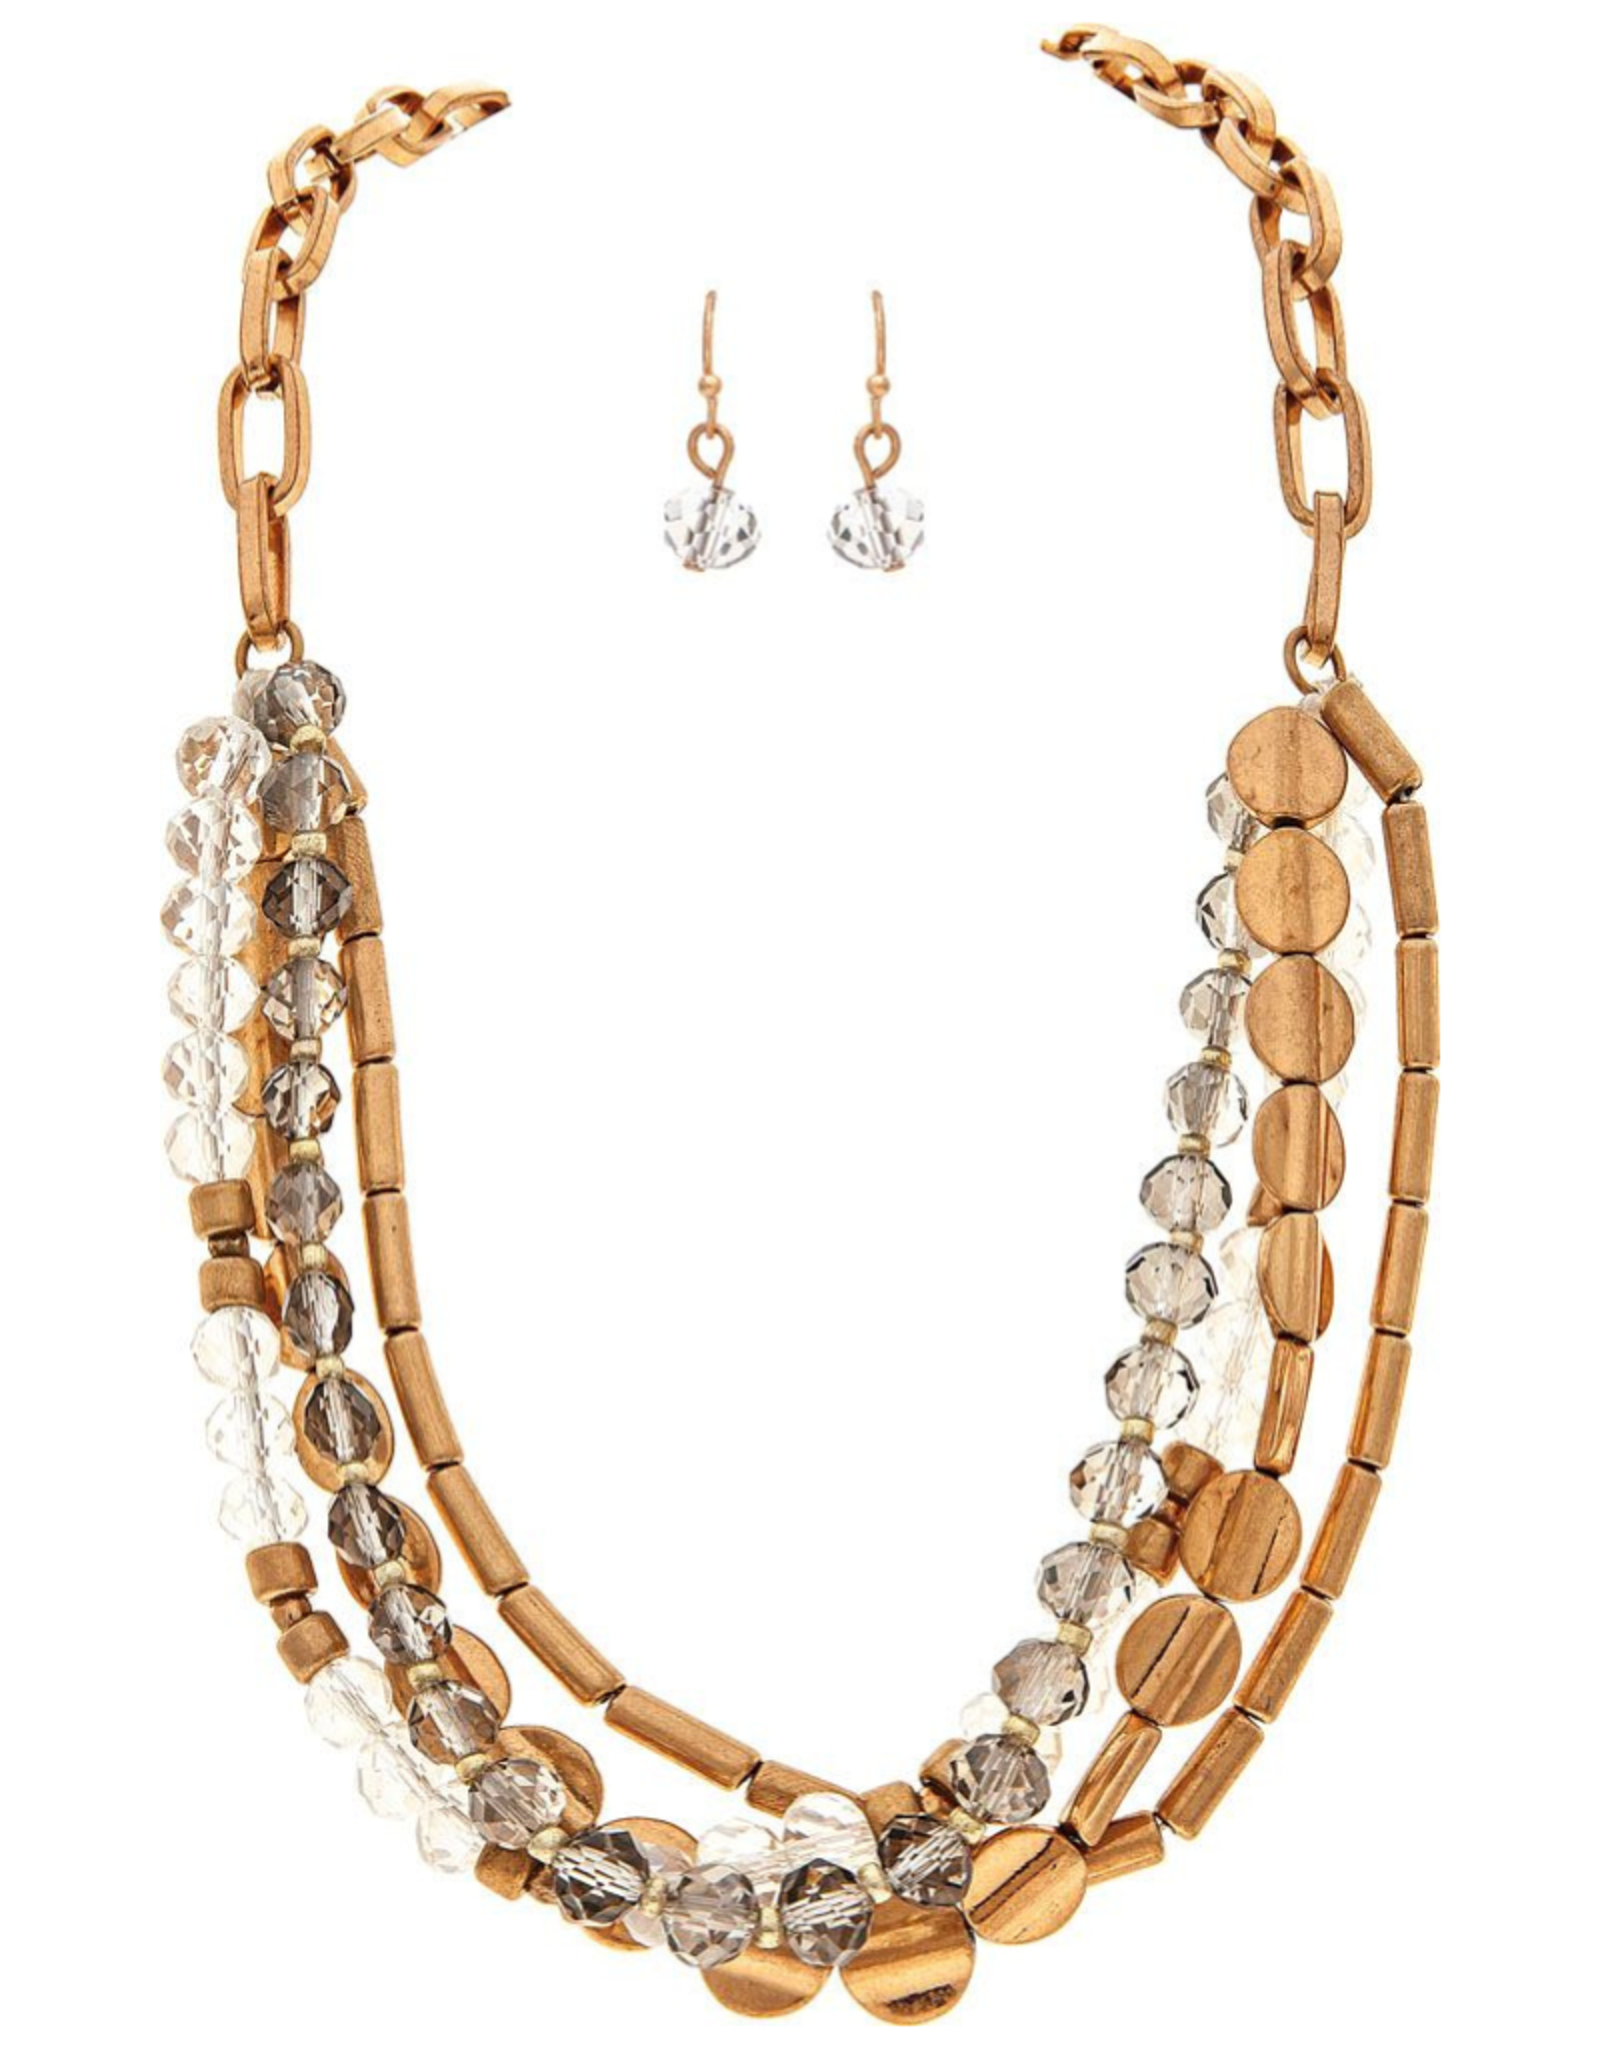 Rain Jewelry Collection NECKLACE SET-2TONE GREY BEADS/CHAIN